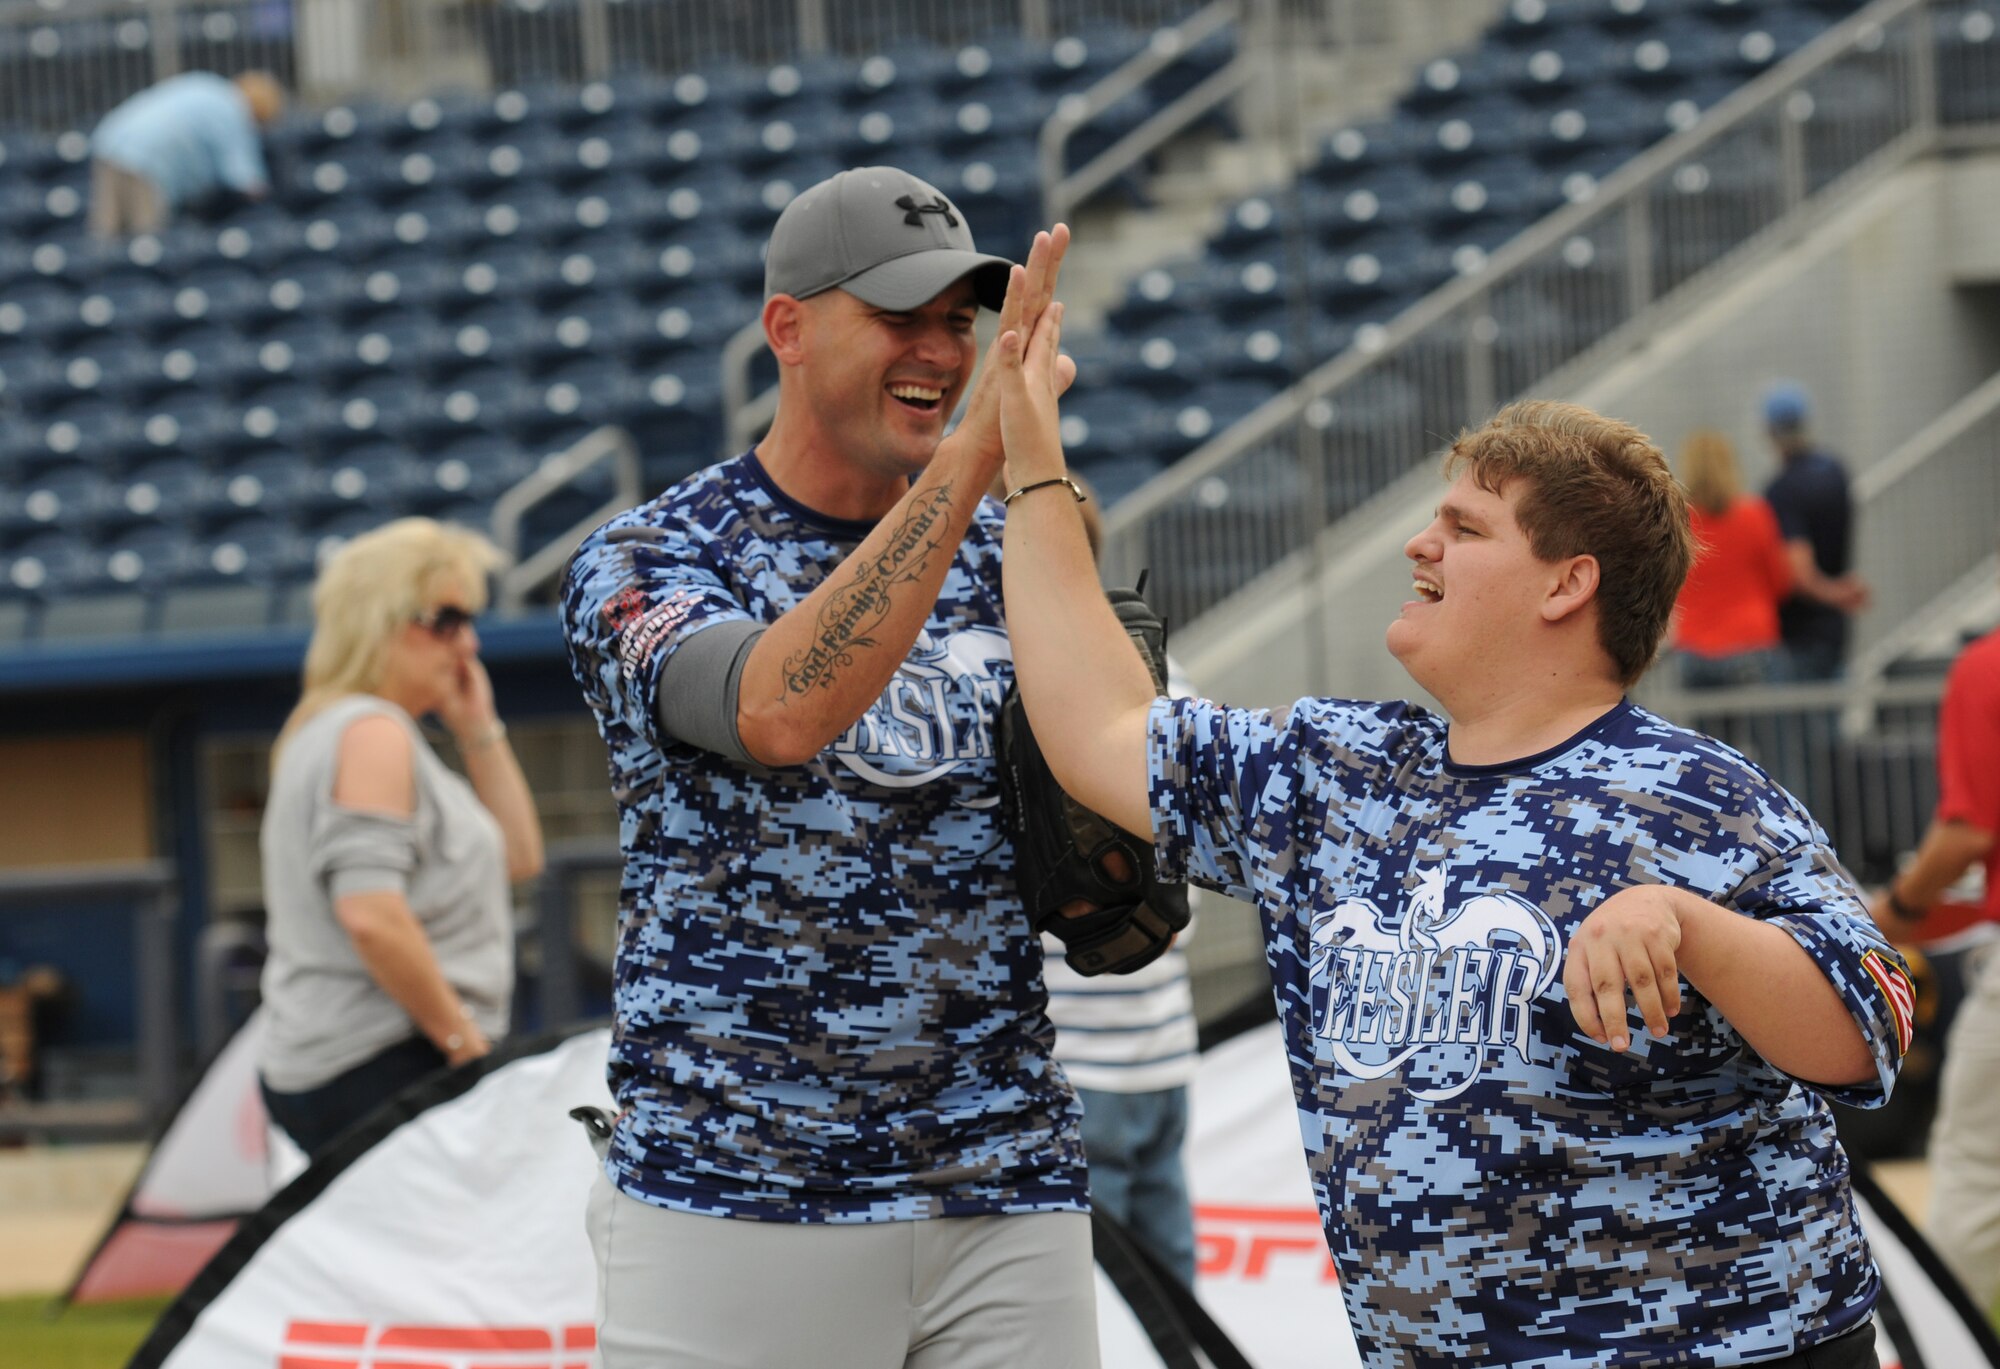 Senior Master Sgt. Zackery Turbyfill, 81st Training Group military training leader superintendent, gives a high-five to Zachery Cerone, Special Olympics athlete, as they warm-up during the “Boots versus Badges” softball game at the Biloxi Shuckers MGM Park April 21, 2016, Biloxi, Miss. The game was the kickoff event for the 2016 Special Olympics Mississippi Summer Games, which will be hosted by Keesler Air Force Base, Miss., May 20-21. (U.S. Air Force photo by Kemberly Groue)